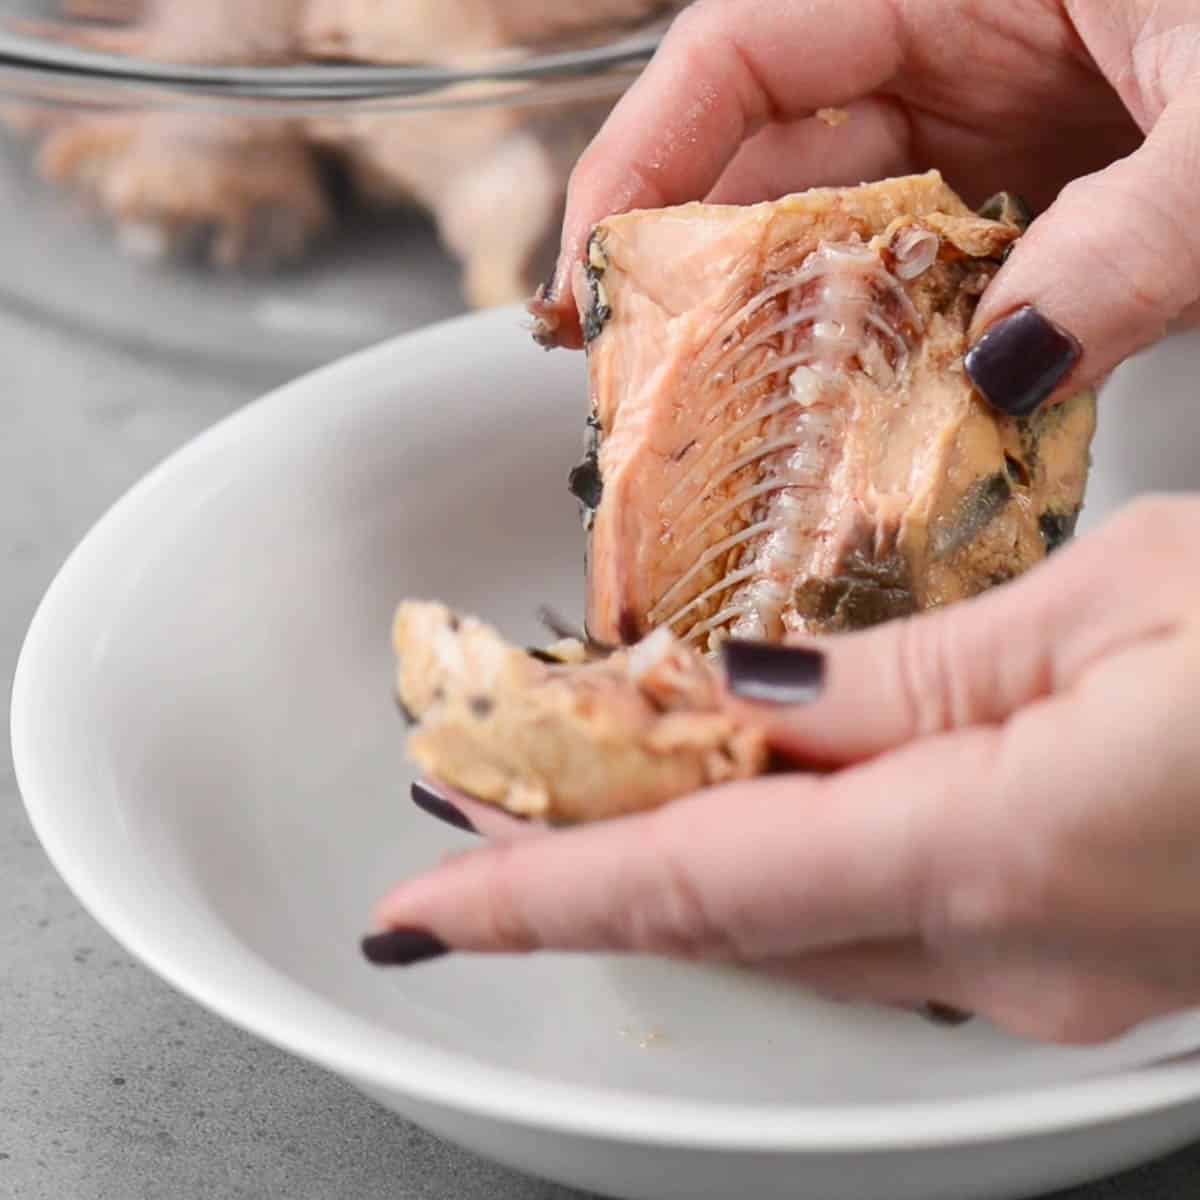 removing the bones from canned salmon